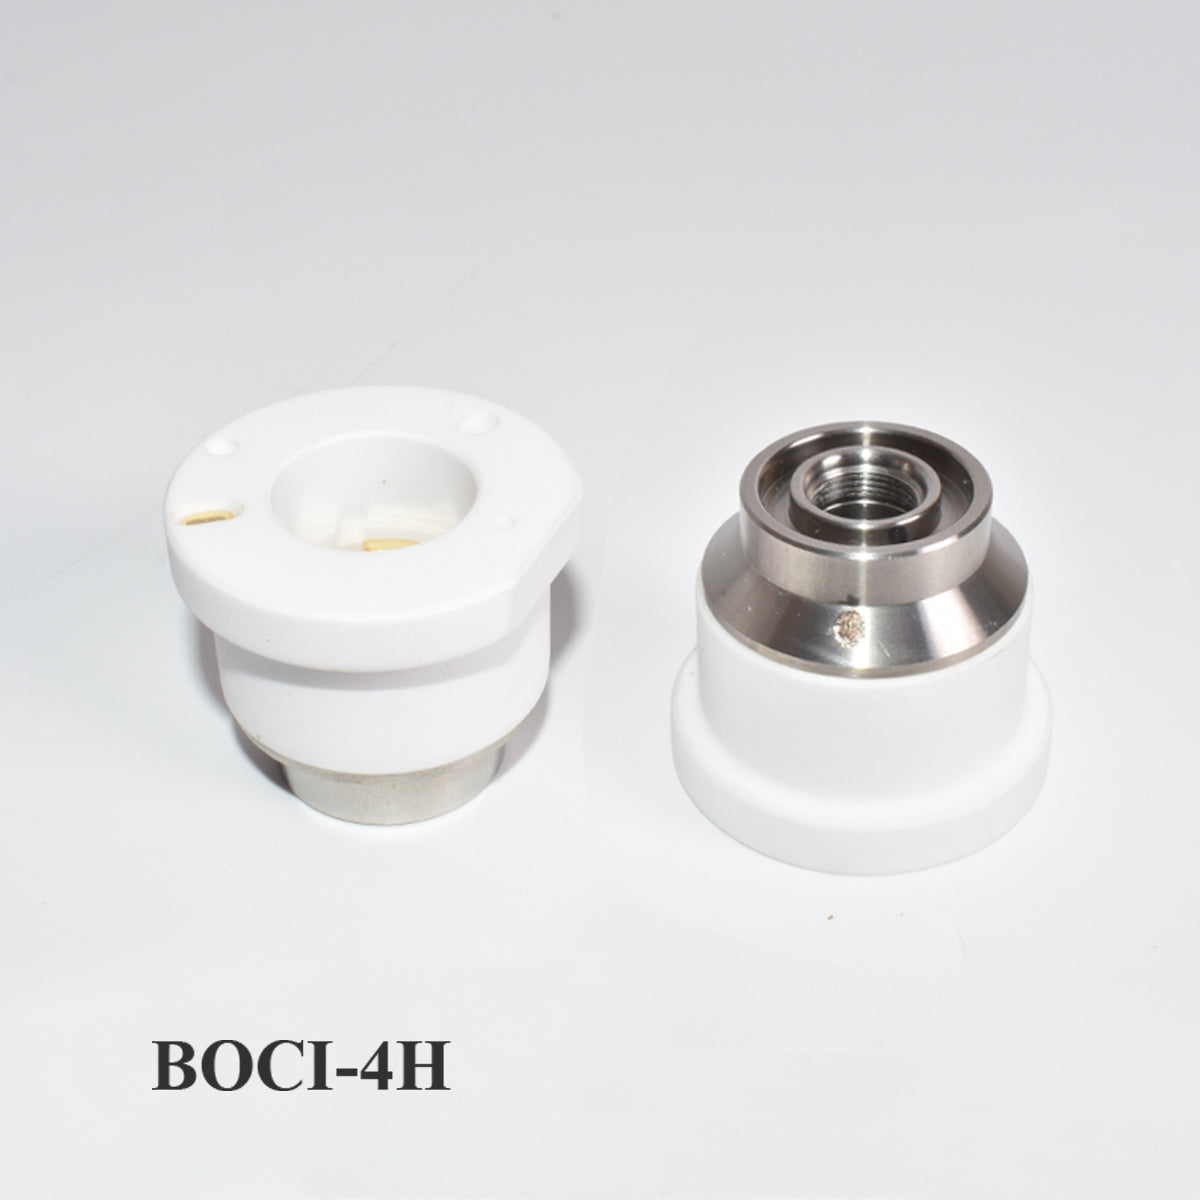 Startnow BOCI LaserMech With Hole Cutting Head Ceramic Rings M8 Nozzle Connector